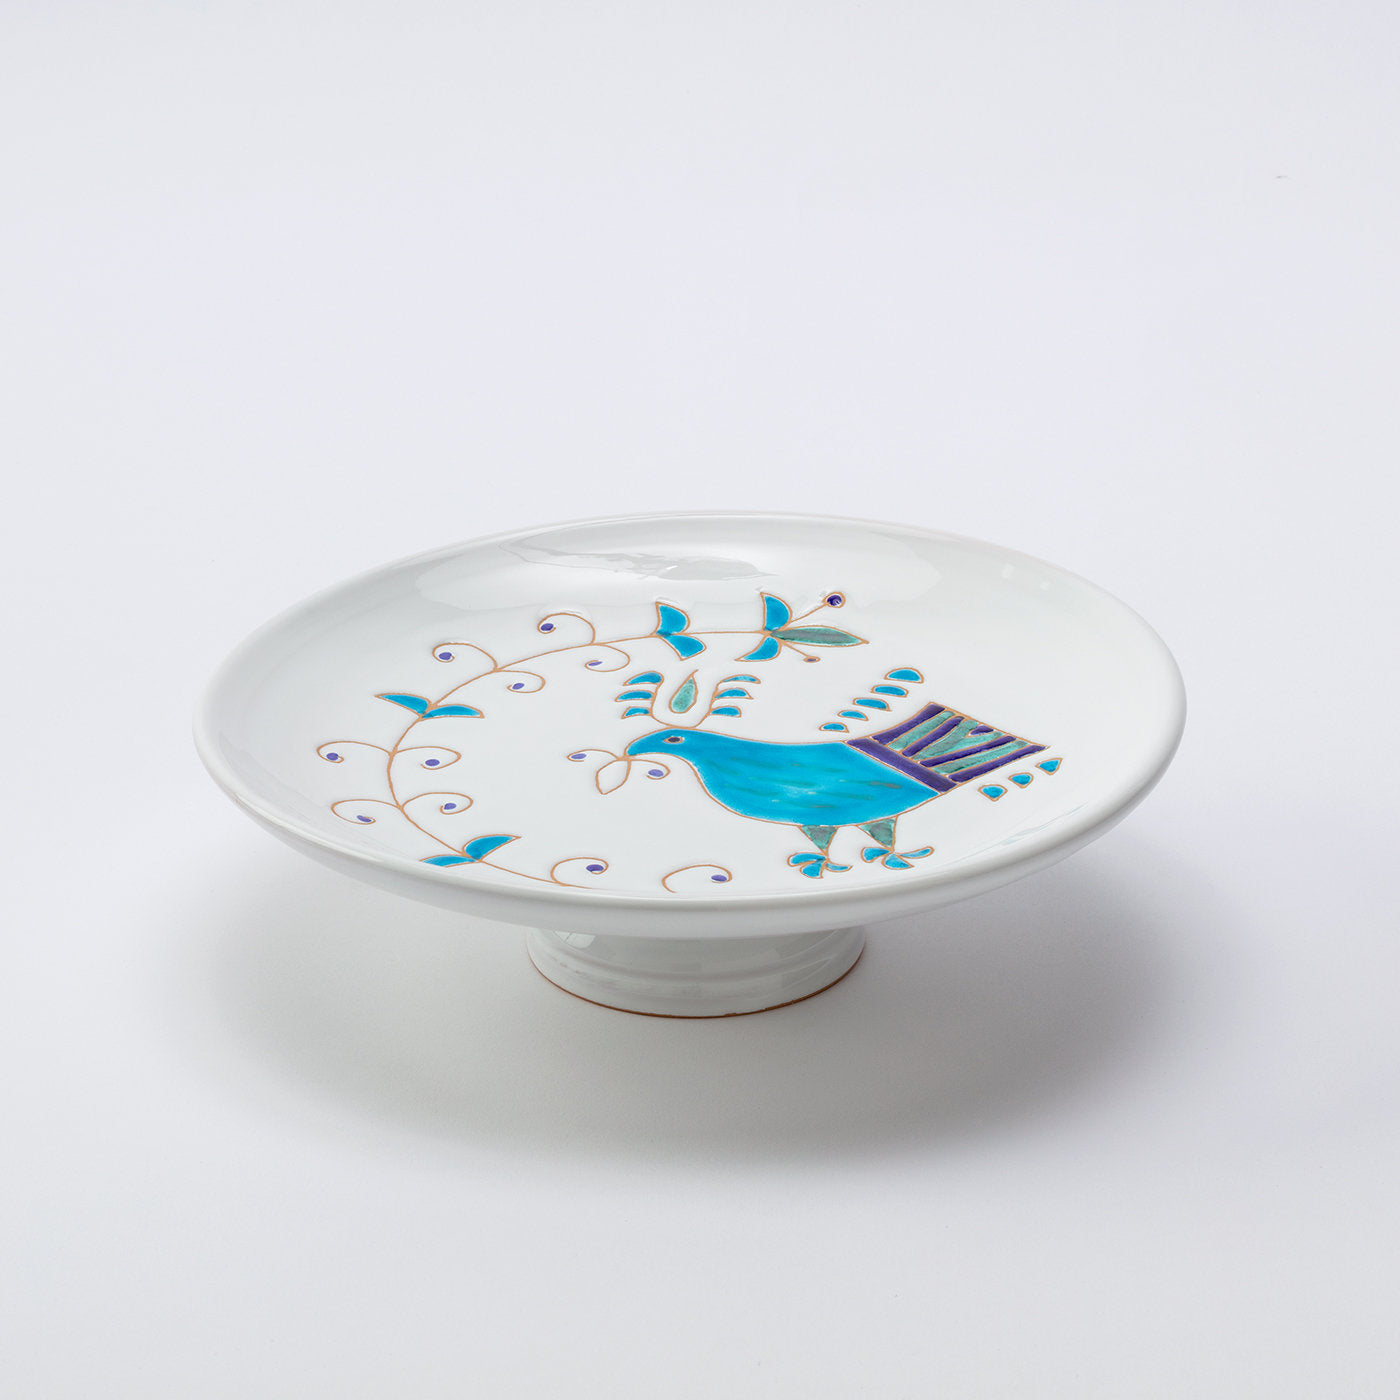 Le Pavoncelle Cake Stand - Alternative view 1